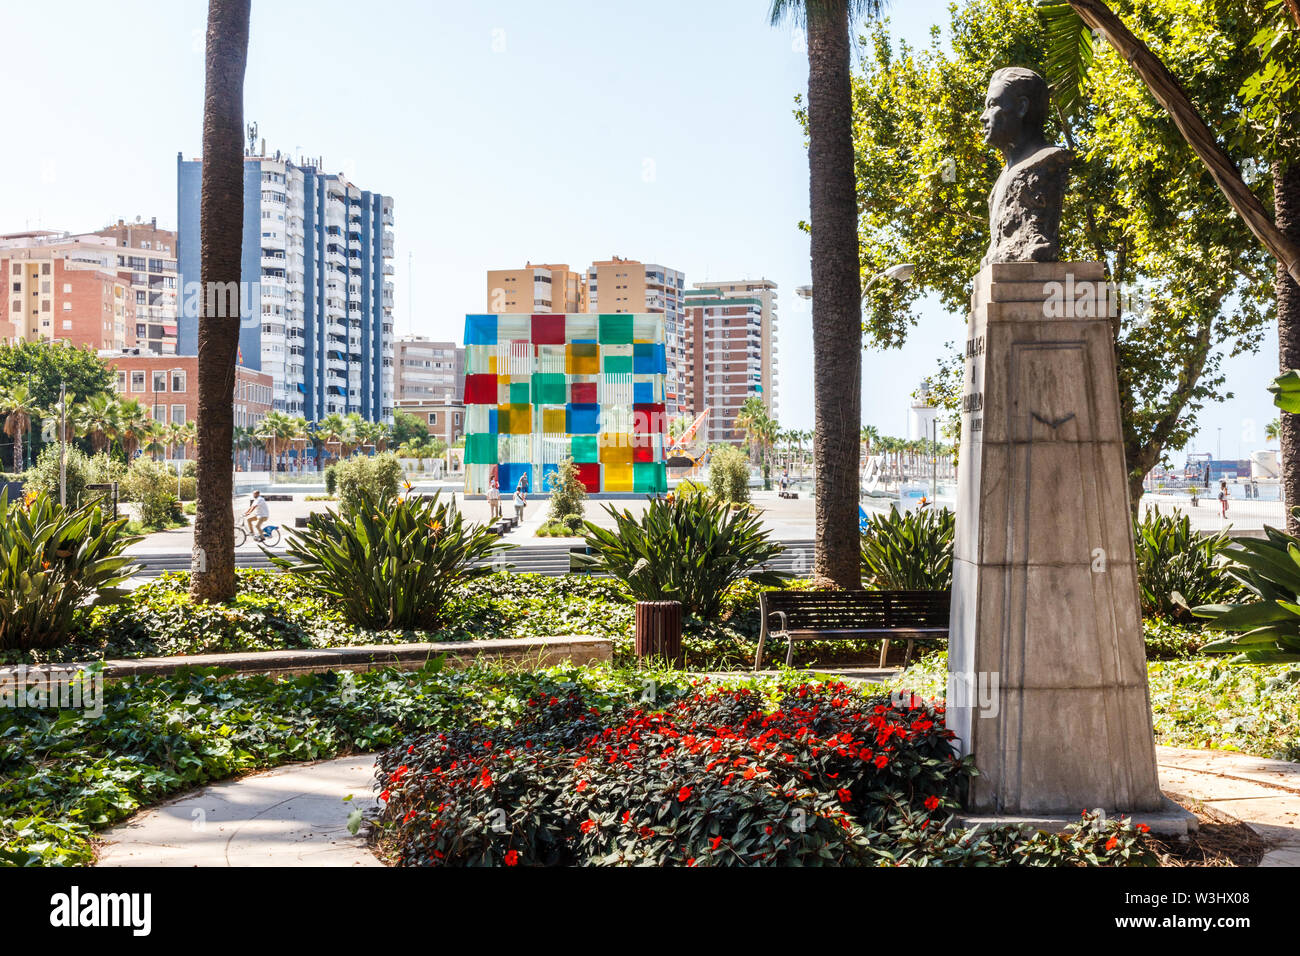 Malaga, Spain - 26th August 2015: Statue of  Ruben Dario in Malaga Park, The Pompidou cultural centre is in the background. Stock Photo